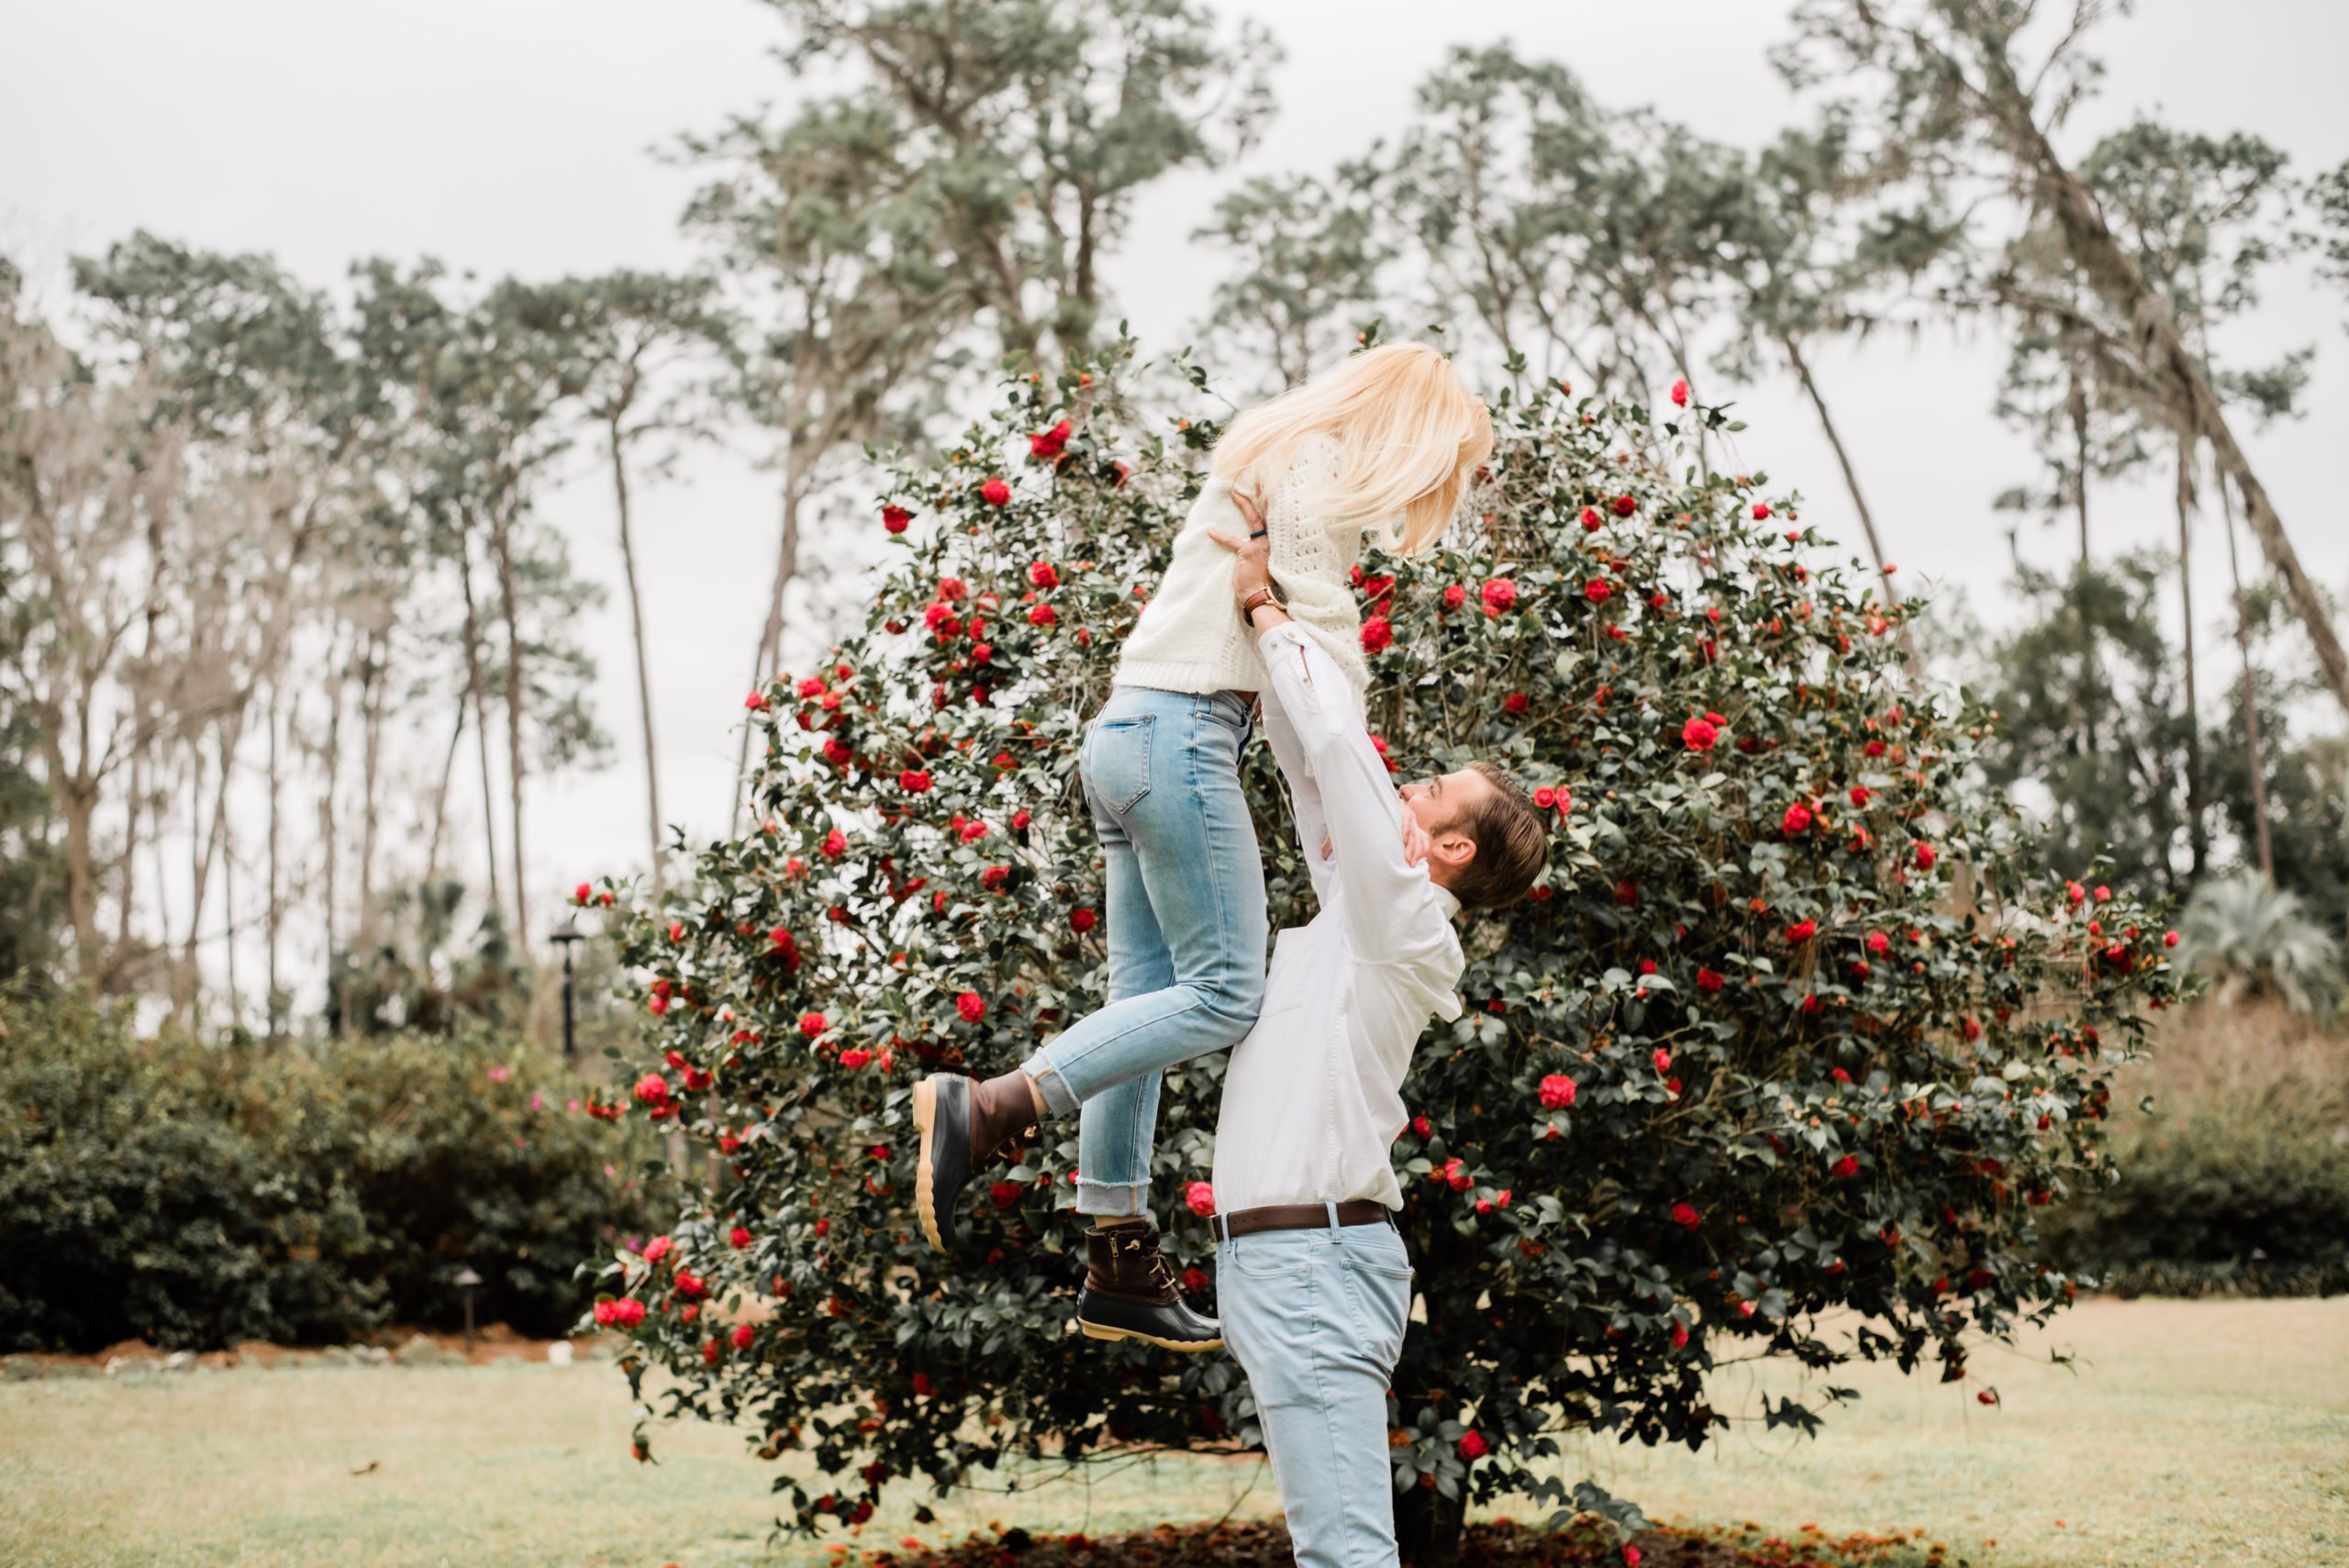 fun couples photos at heritage park and gardens in live oak Florida by Black tie and co